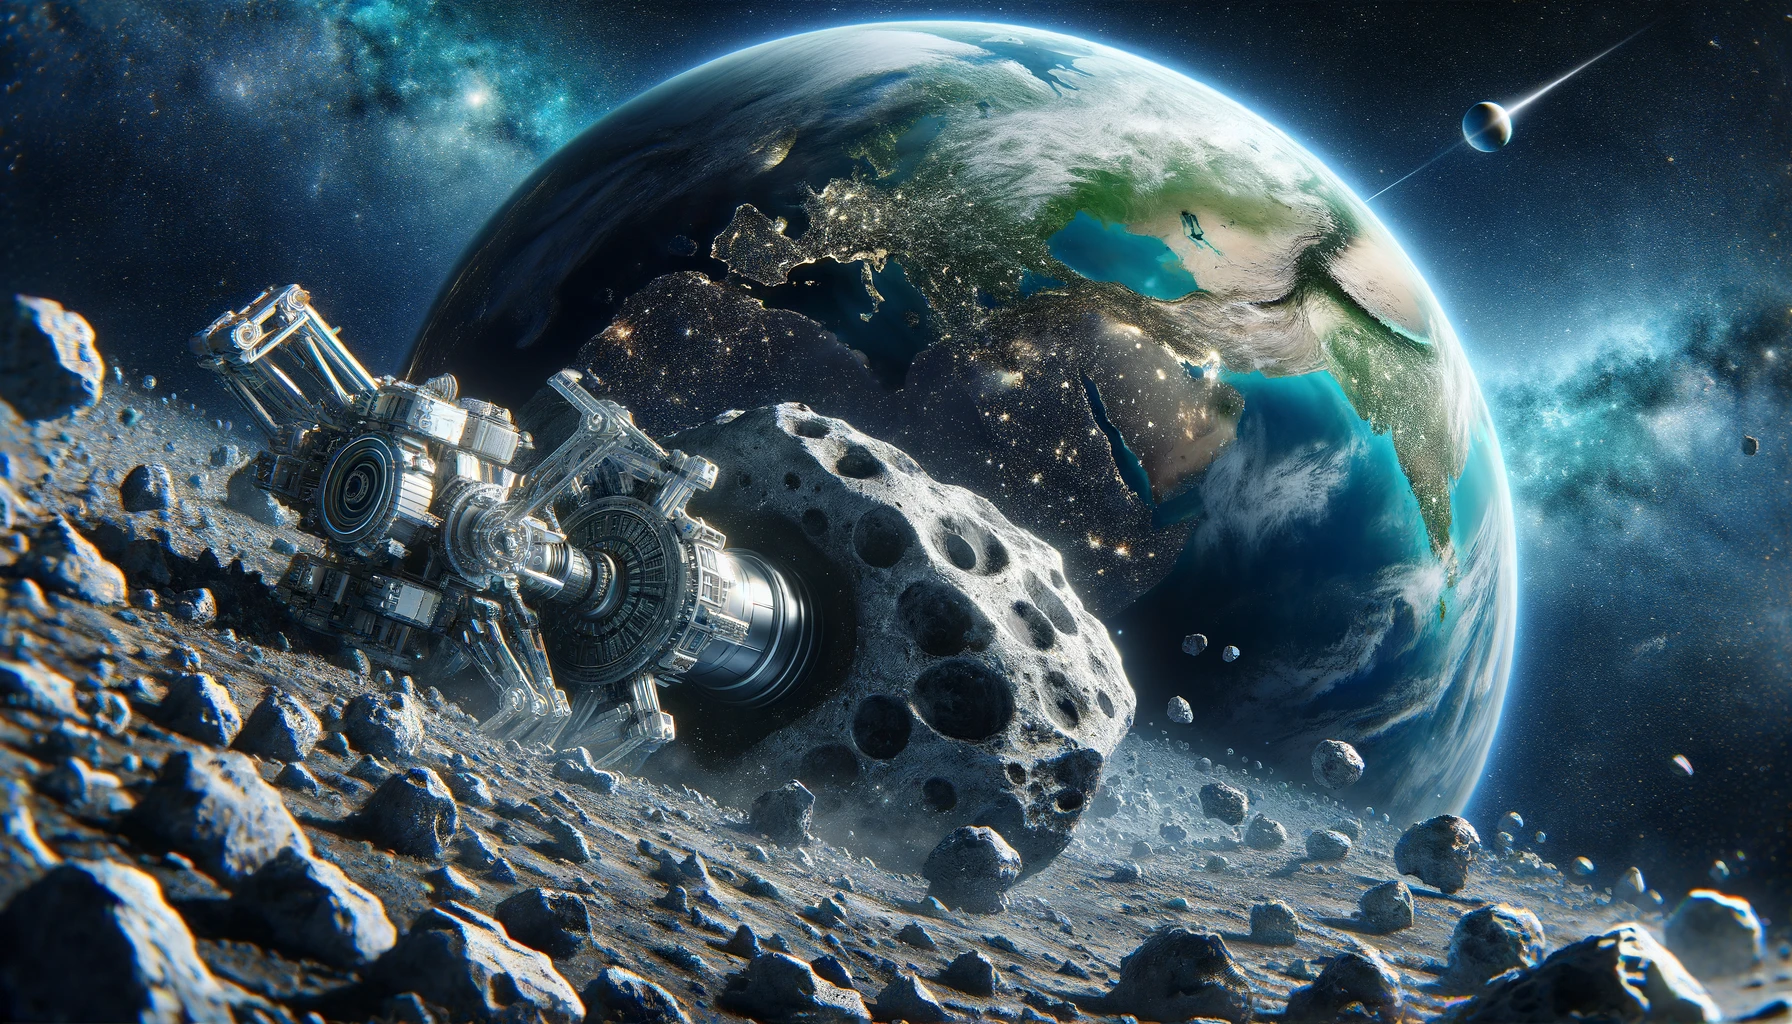 Asteroid Mining: The $100 Trillion Space Industry Gold Rush